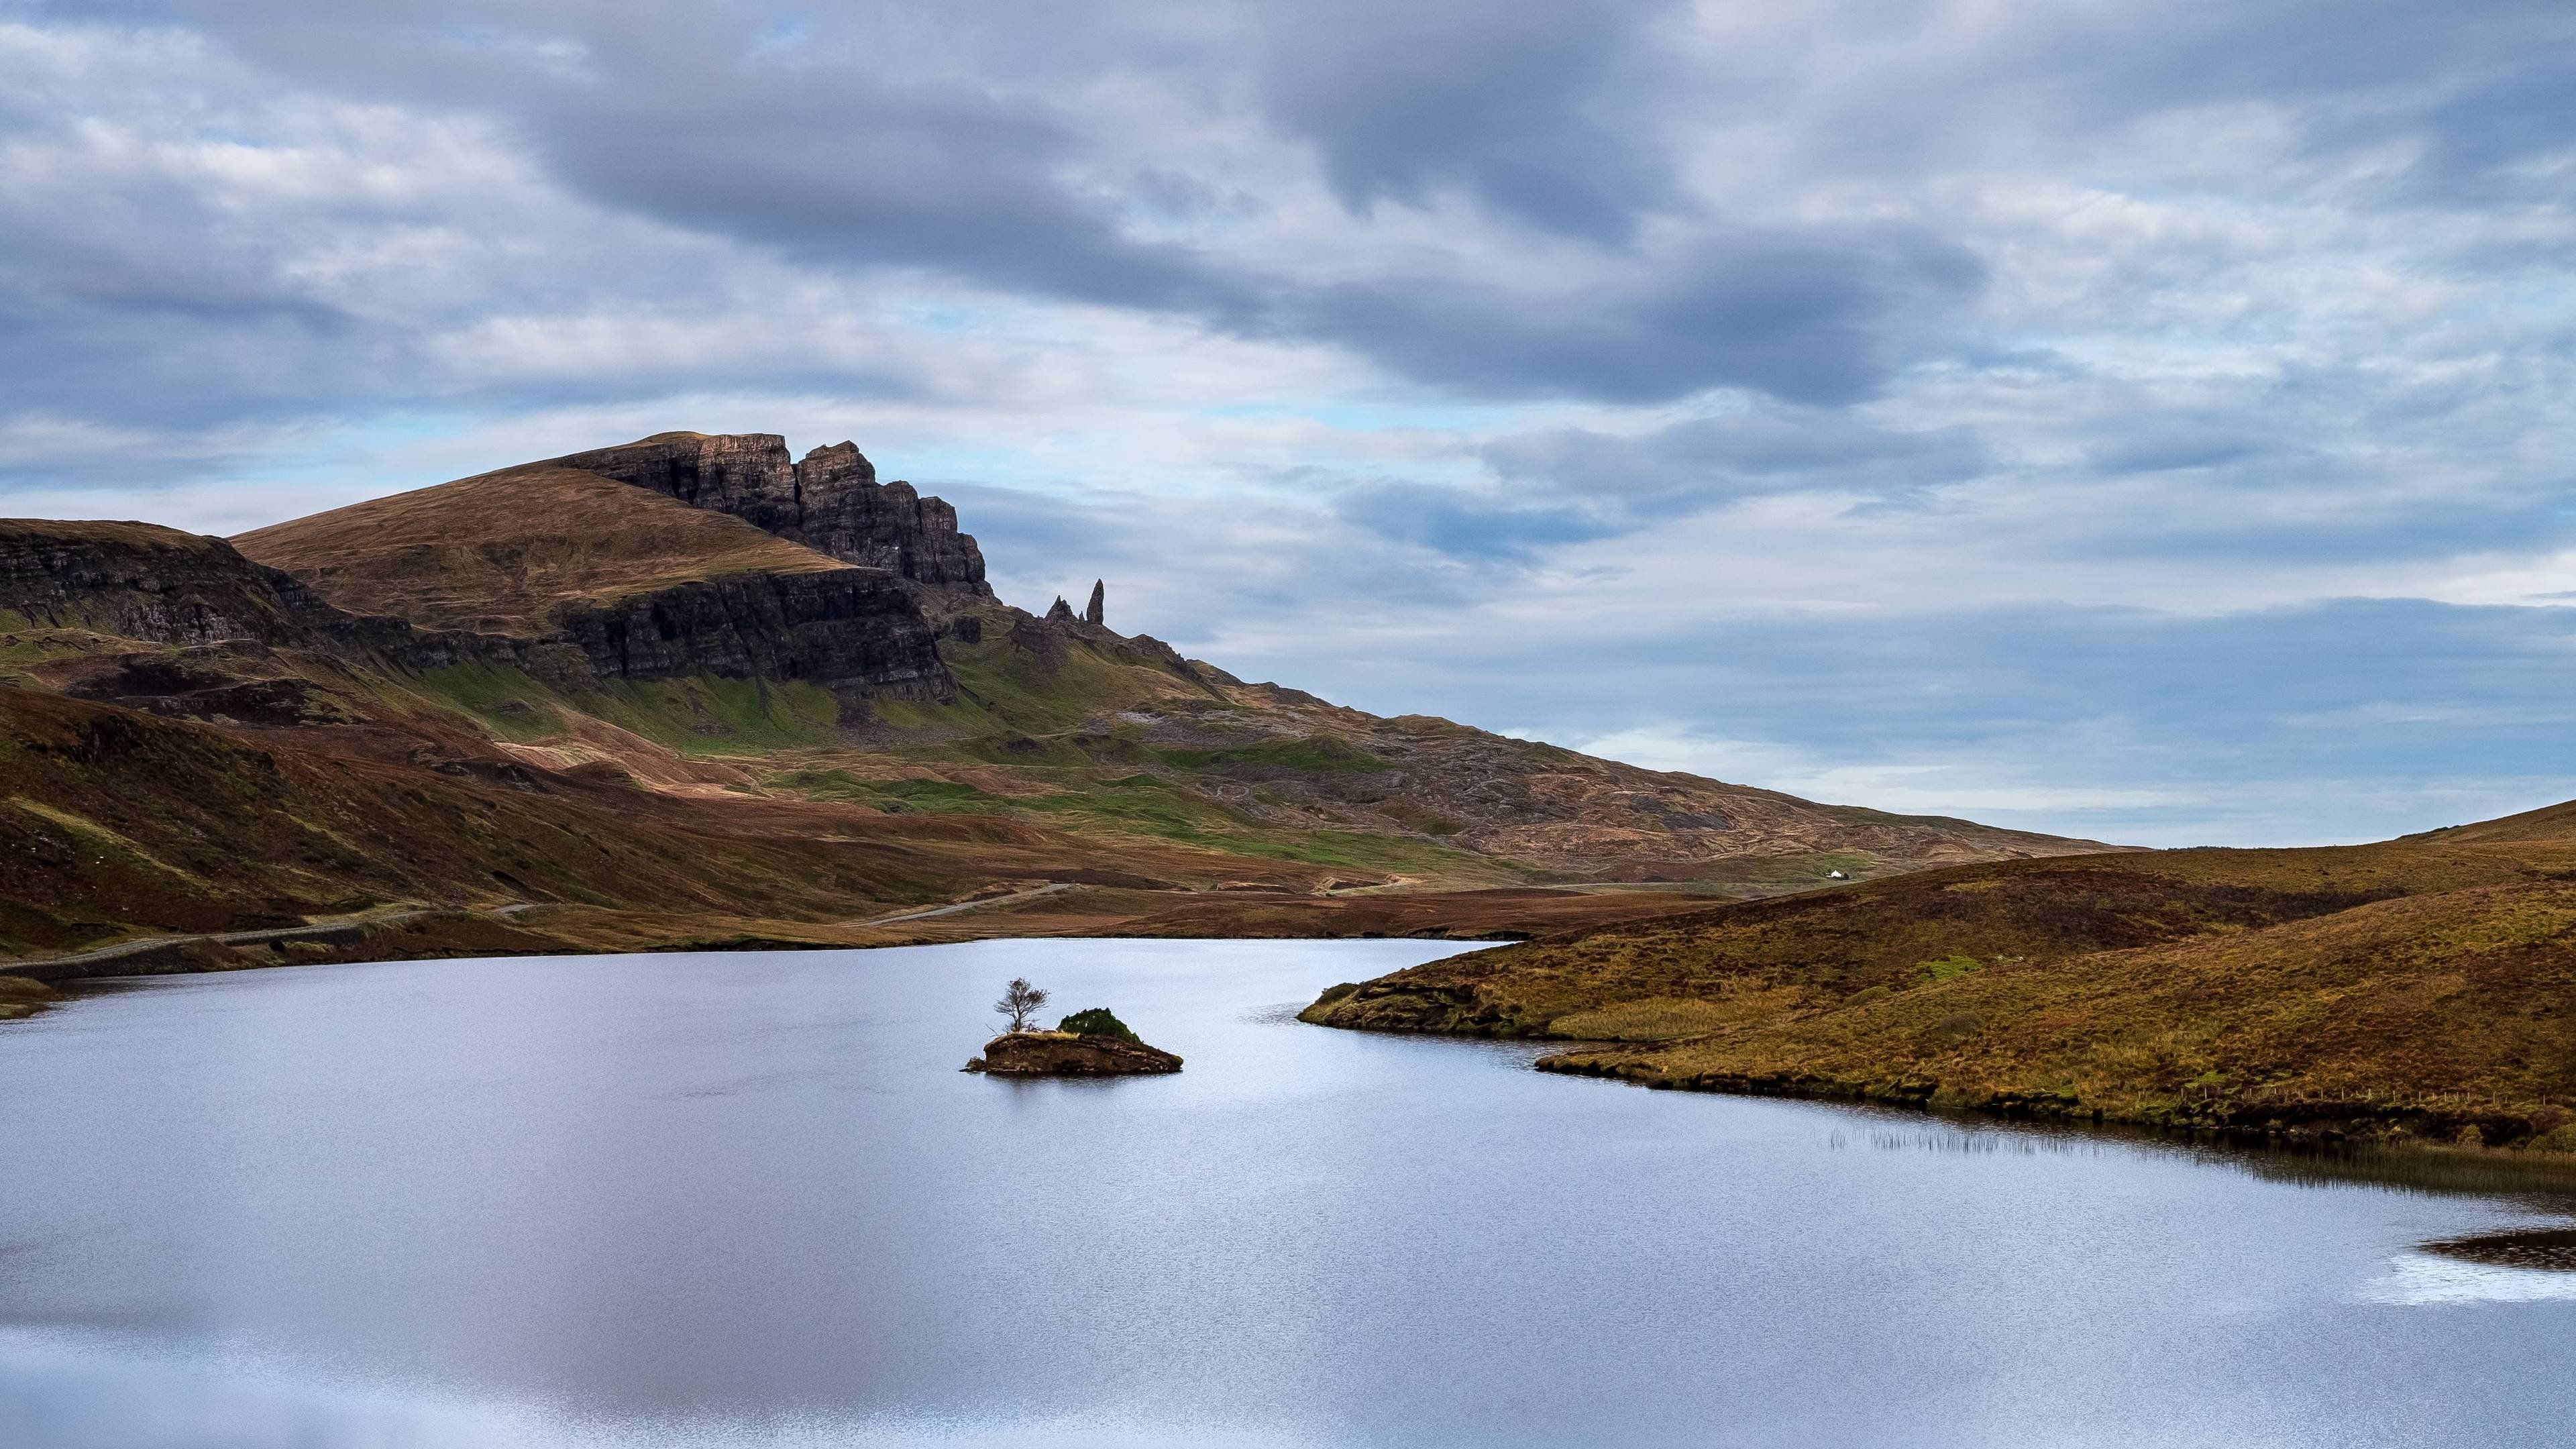 skye 4K wallpaper for your desktop or mobile screen free and easy